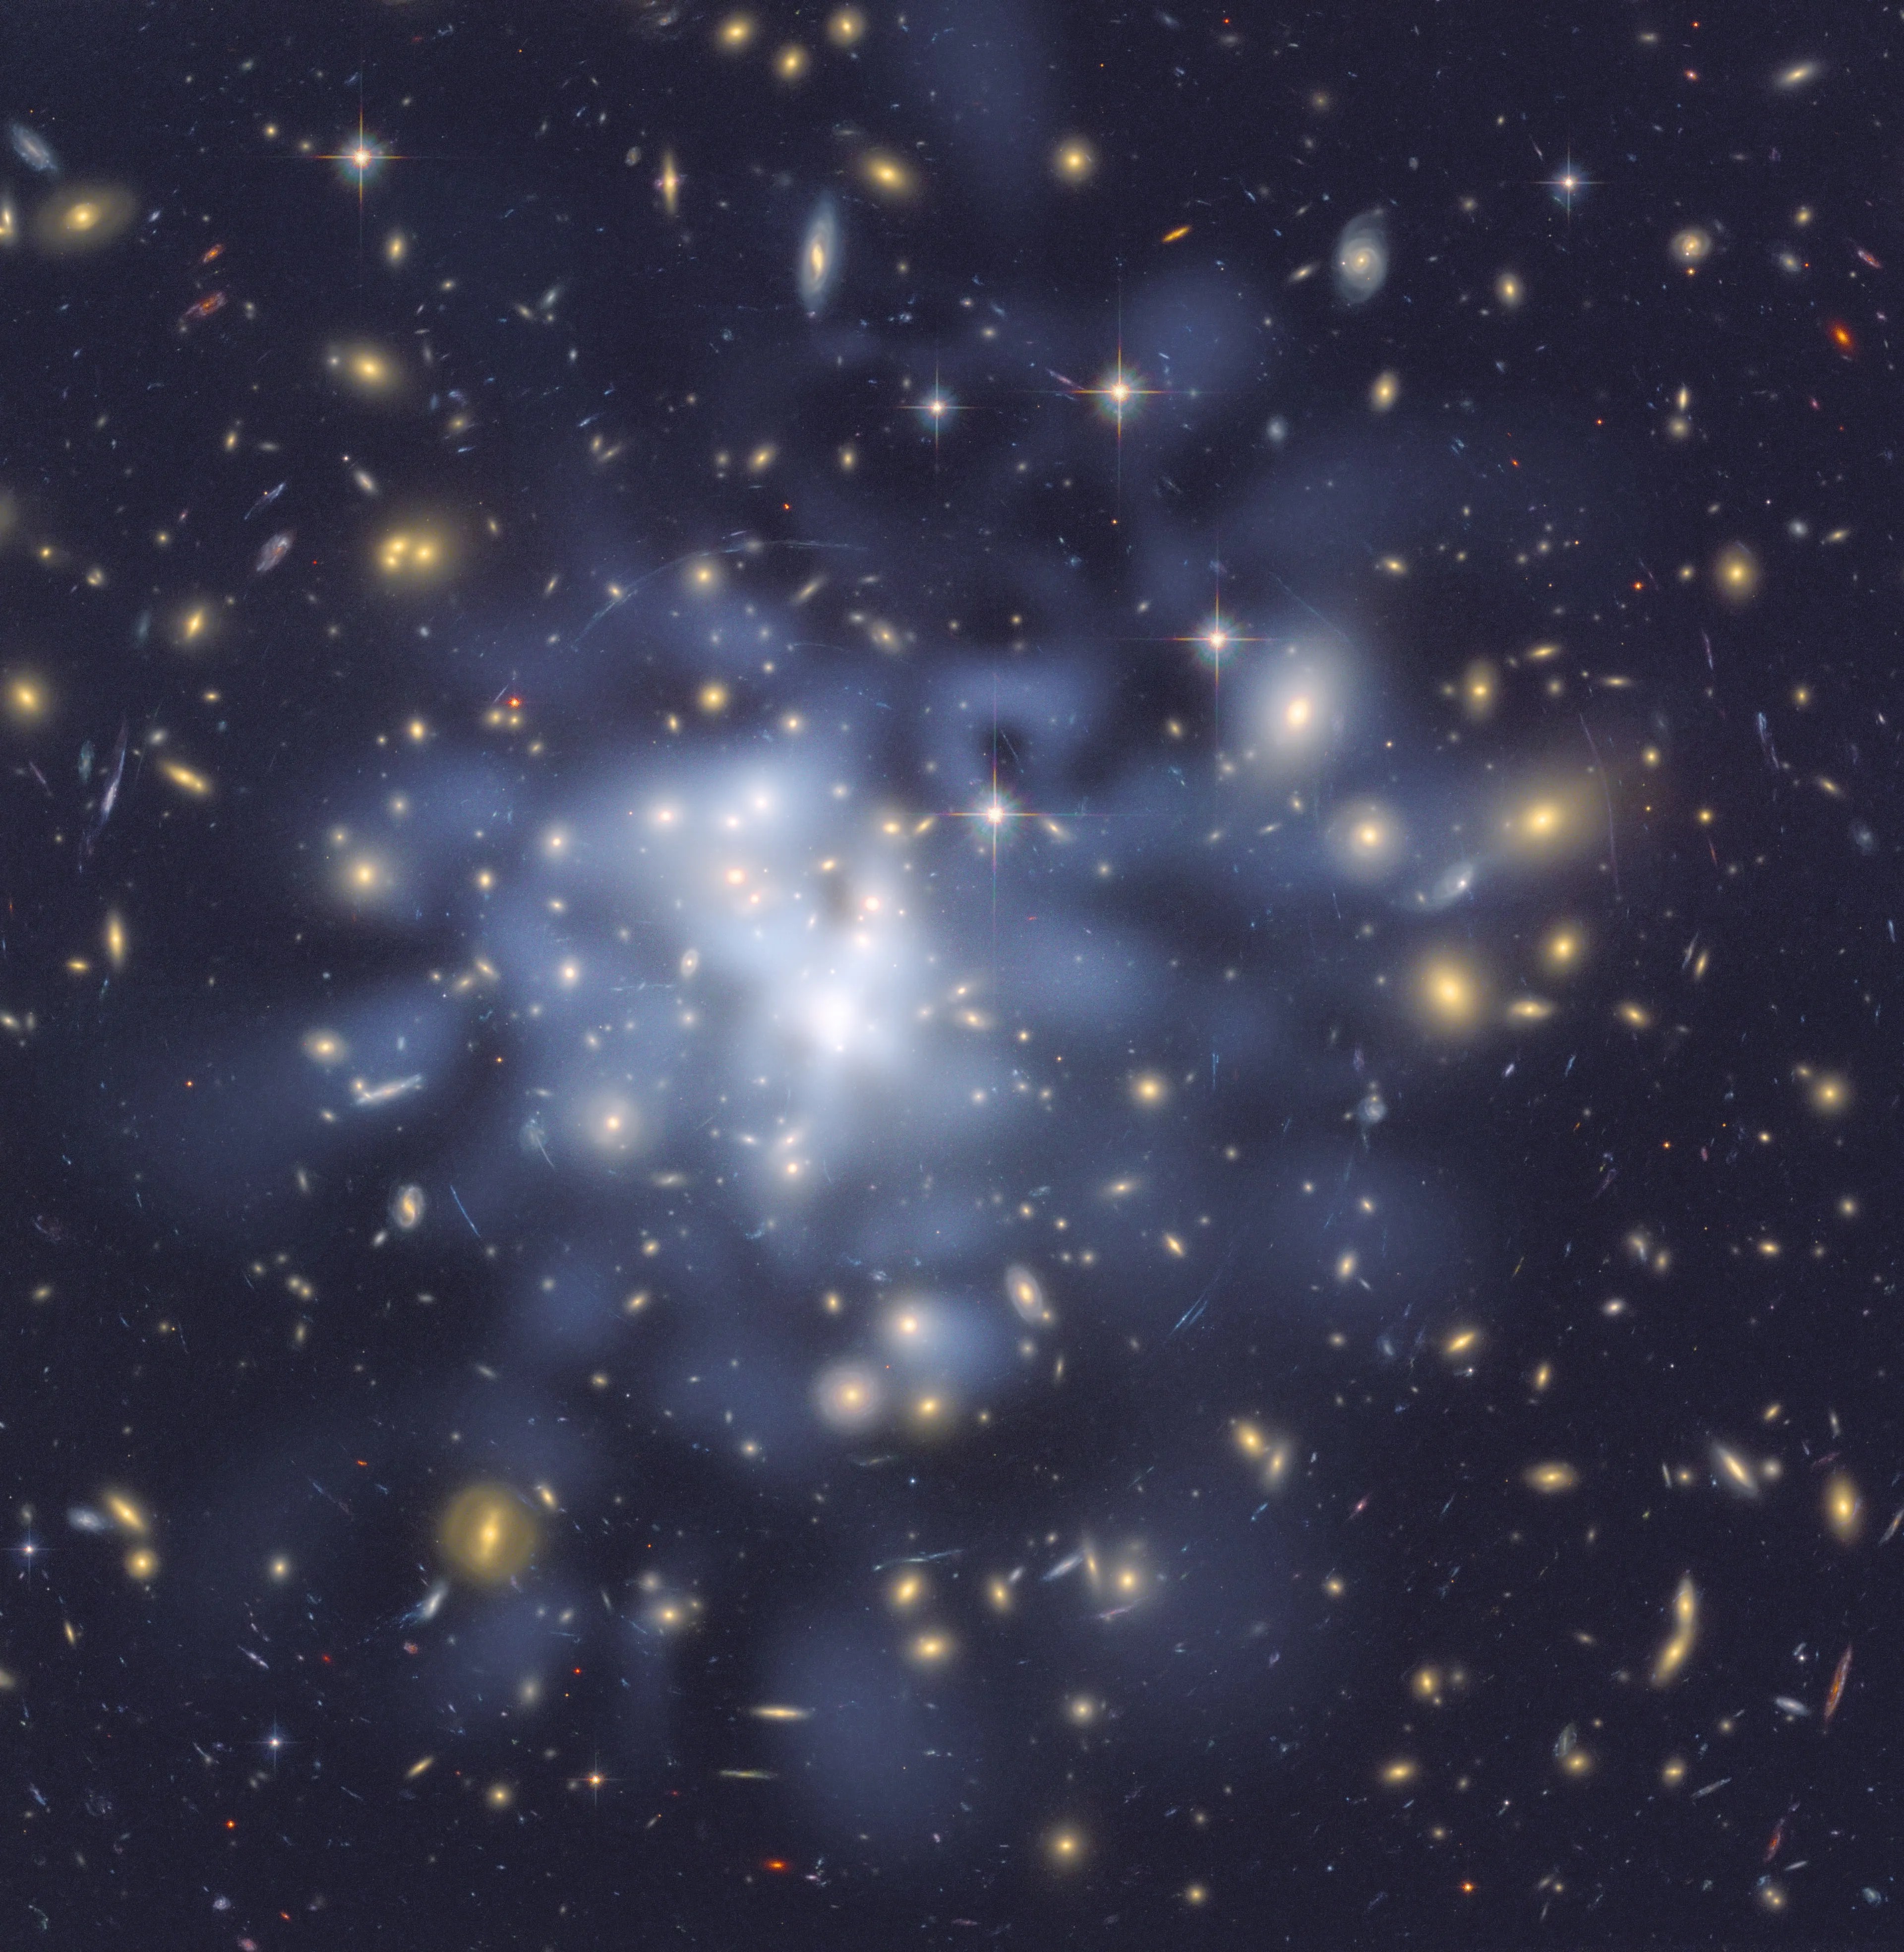 Yellow and white colored galaxies litter the frame. Blue, blue-white, and white clouds denote the distribution of dark matter, which is concentrated just to the left of center.